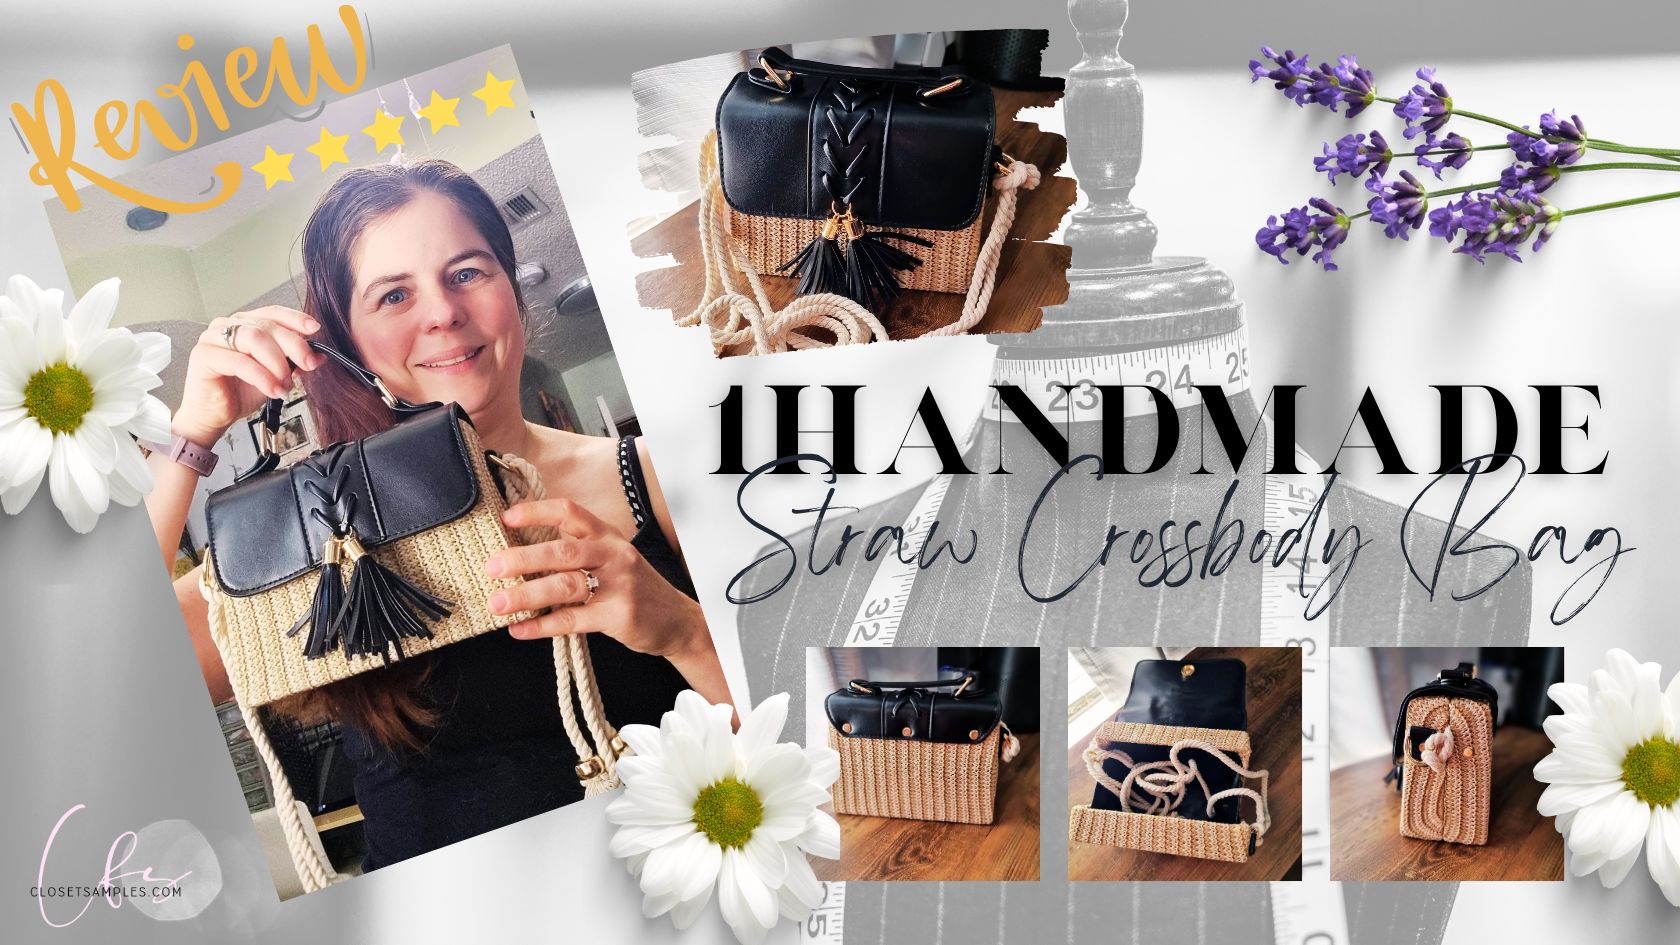 Elevate Your Summer Style with the 1handmade Straw Crossbody Bag A Detailed Review closetsamples